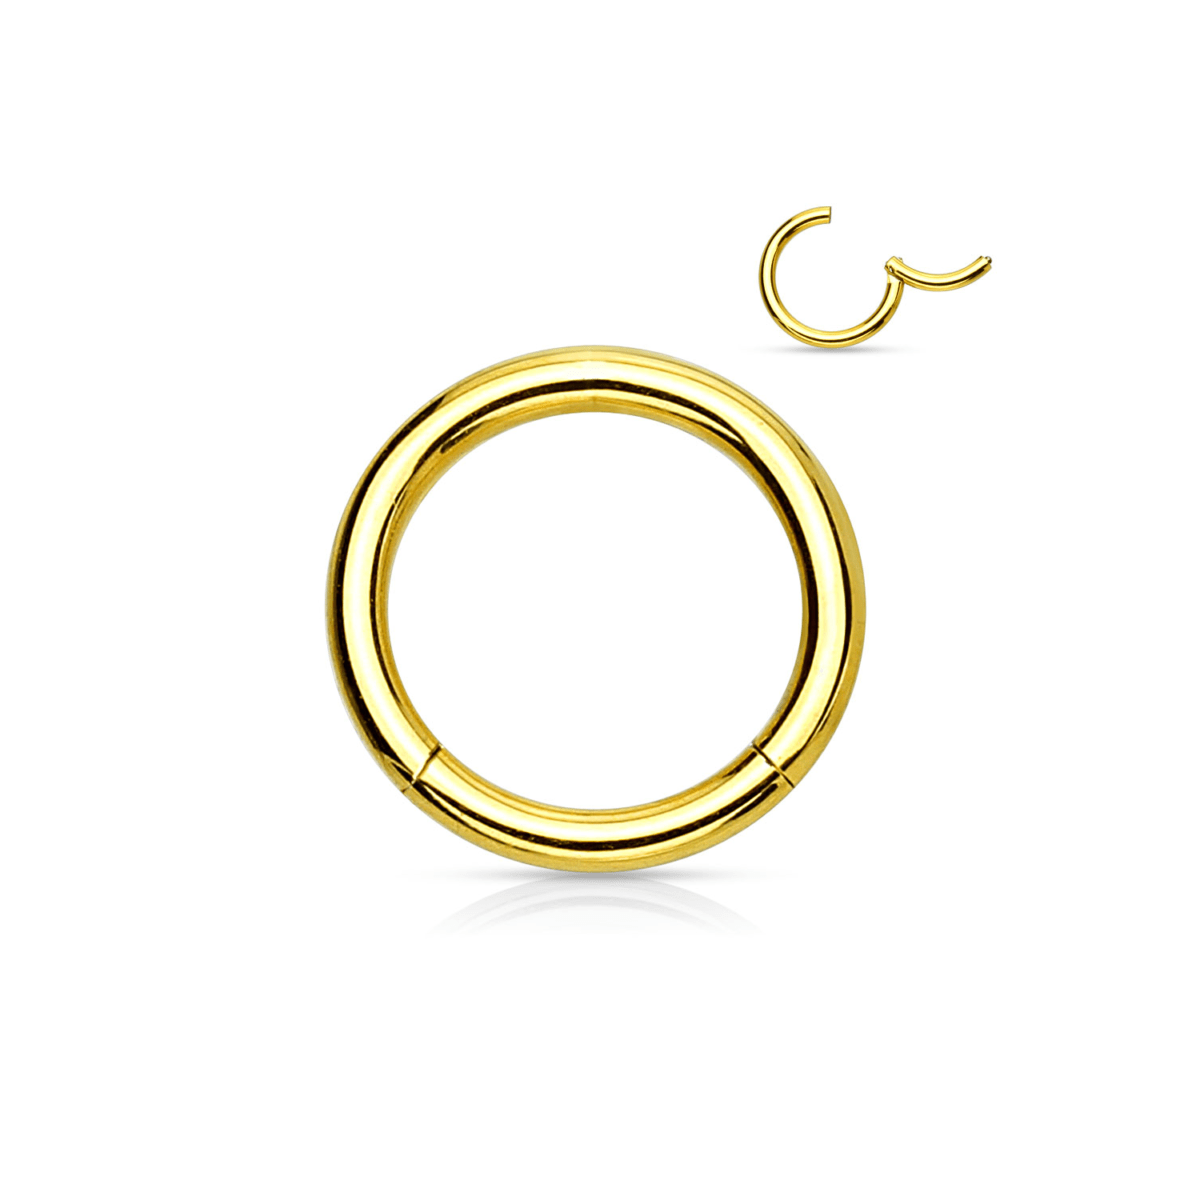 Gold PVD Over Steel Hinged Segment Ring